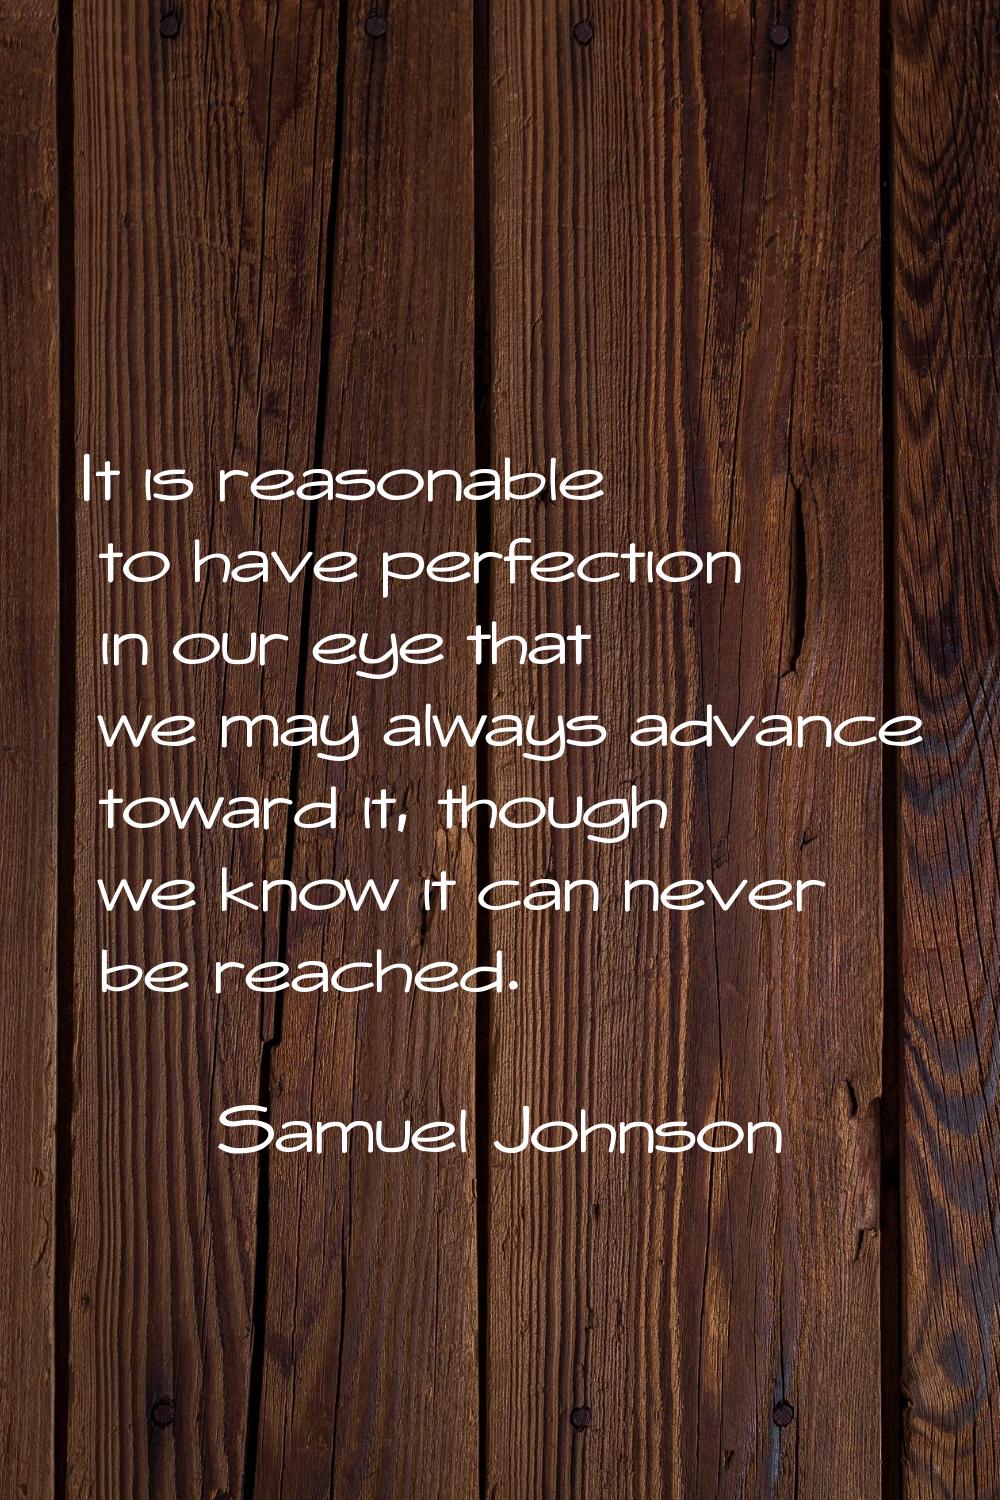 It is reasonable to have perfection in our eye that we may always advance toward it, though we know